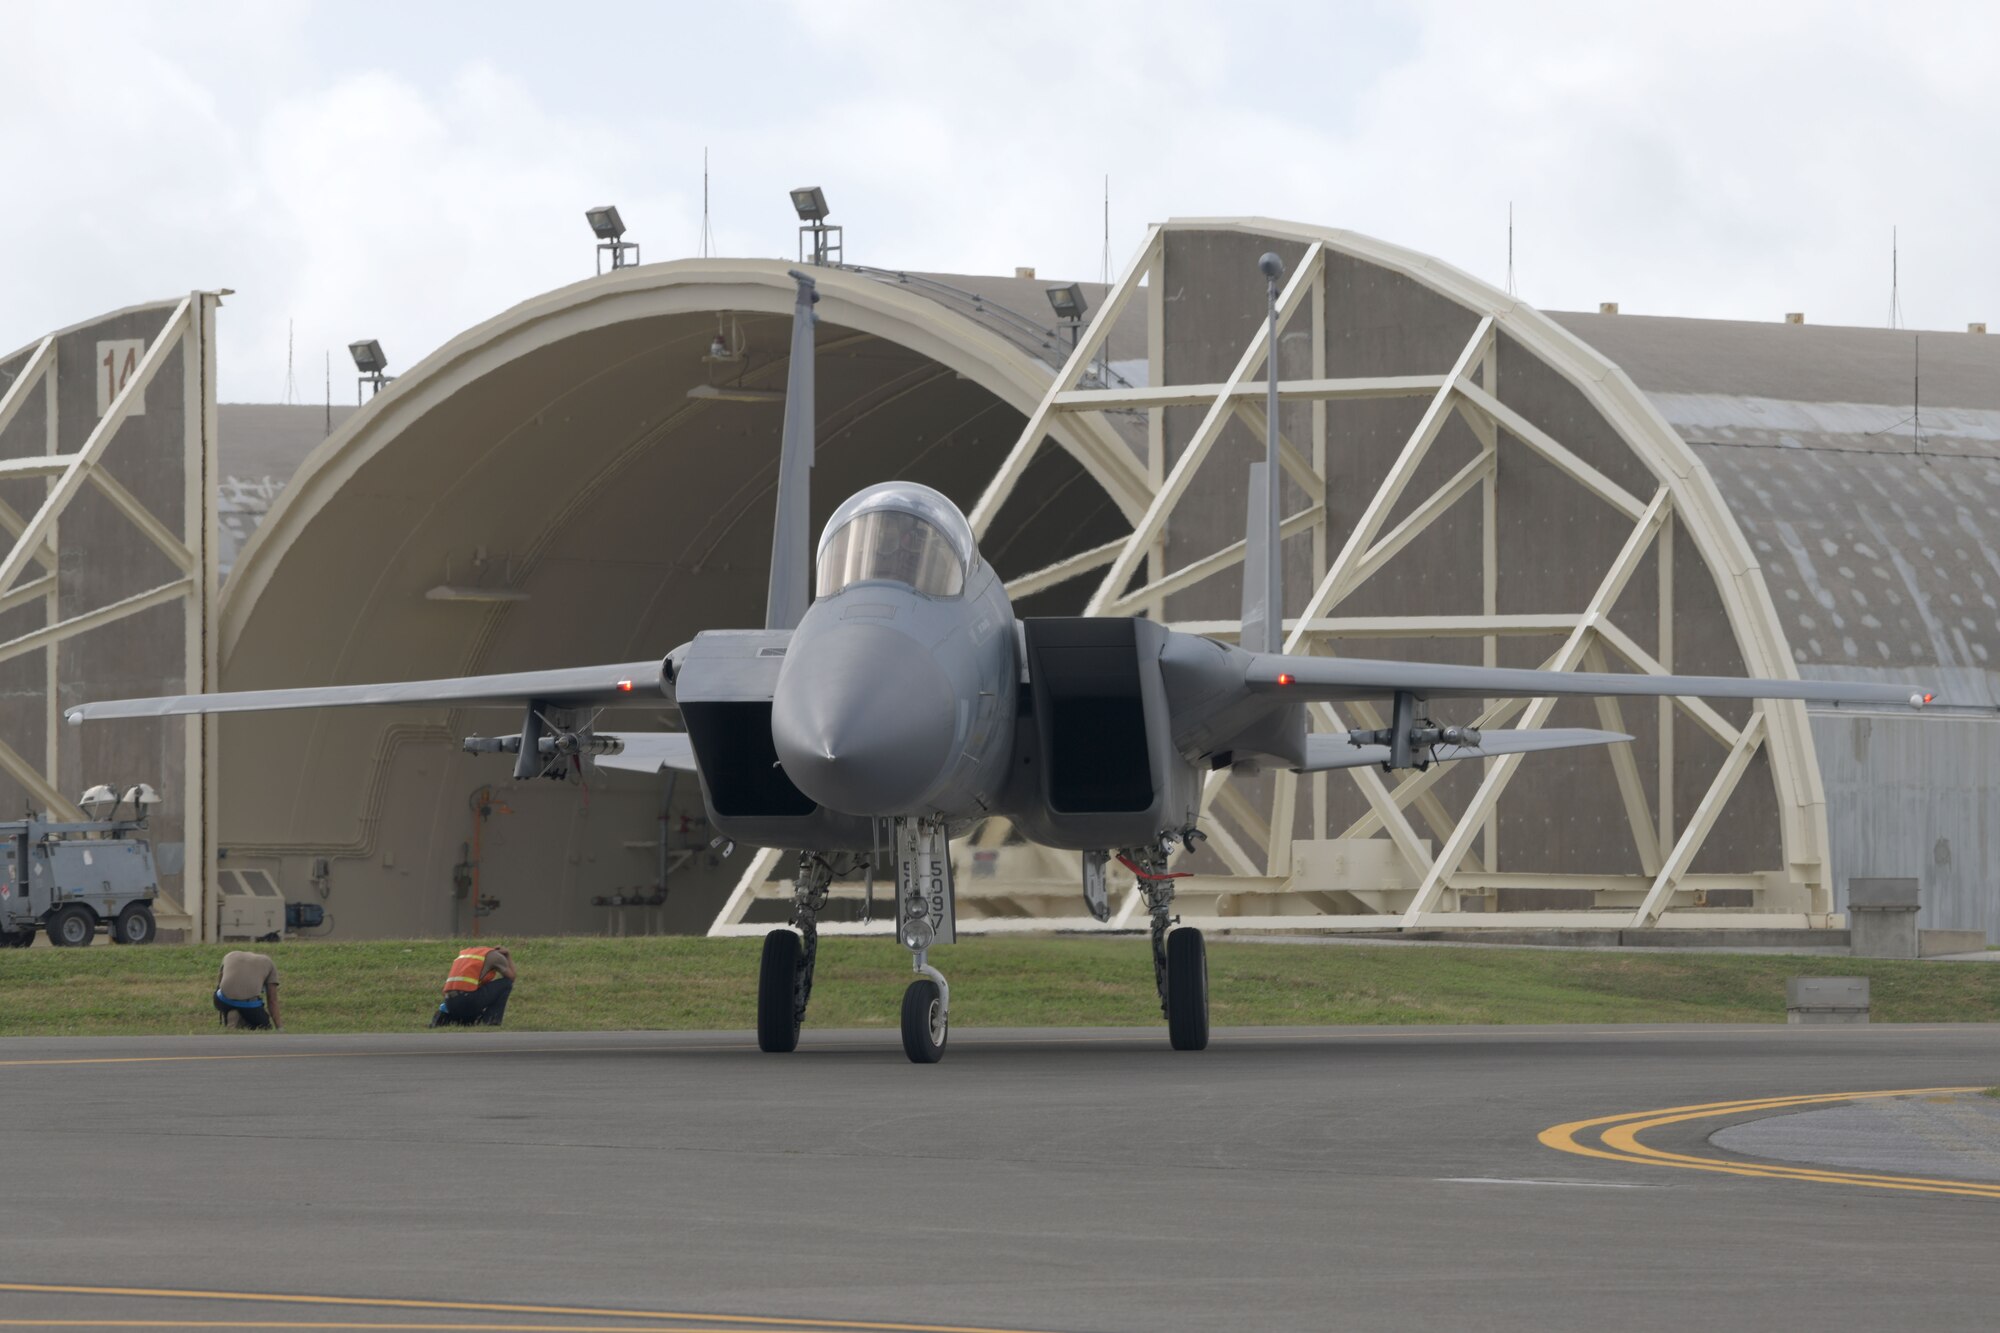 An F-15C Eagle taxis down the flight line of Kadena Air Base, Japan, during a “Super Surge,” Nov. 18, 2020. The 44th and 67th Fighter Squadrons set a new record for the most F-15C Eagles flown in a week at 437 sorties; the previous record was 245 sorties. (U.S. Air Force photo by Airman 1st Class Rebeckah Medeiros)